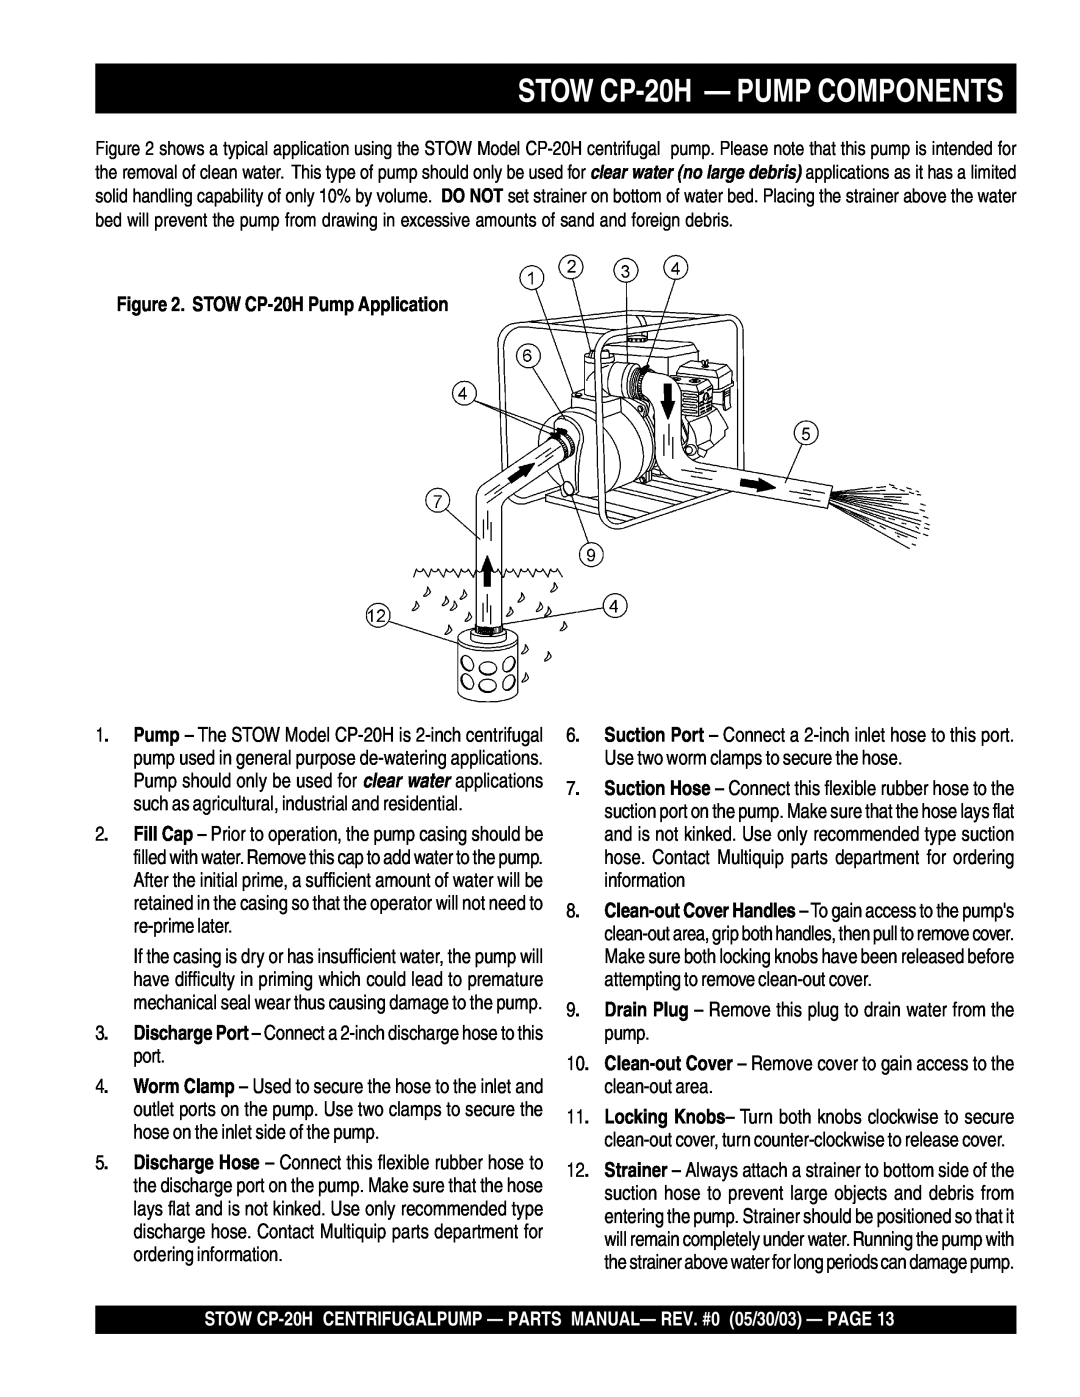 Stow manual STOW CP-20H- PUMP COMPONENTS, STOW CP-20HPump Application 